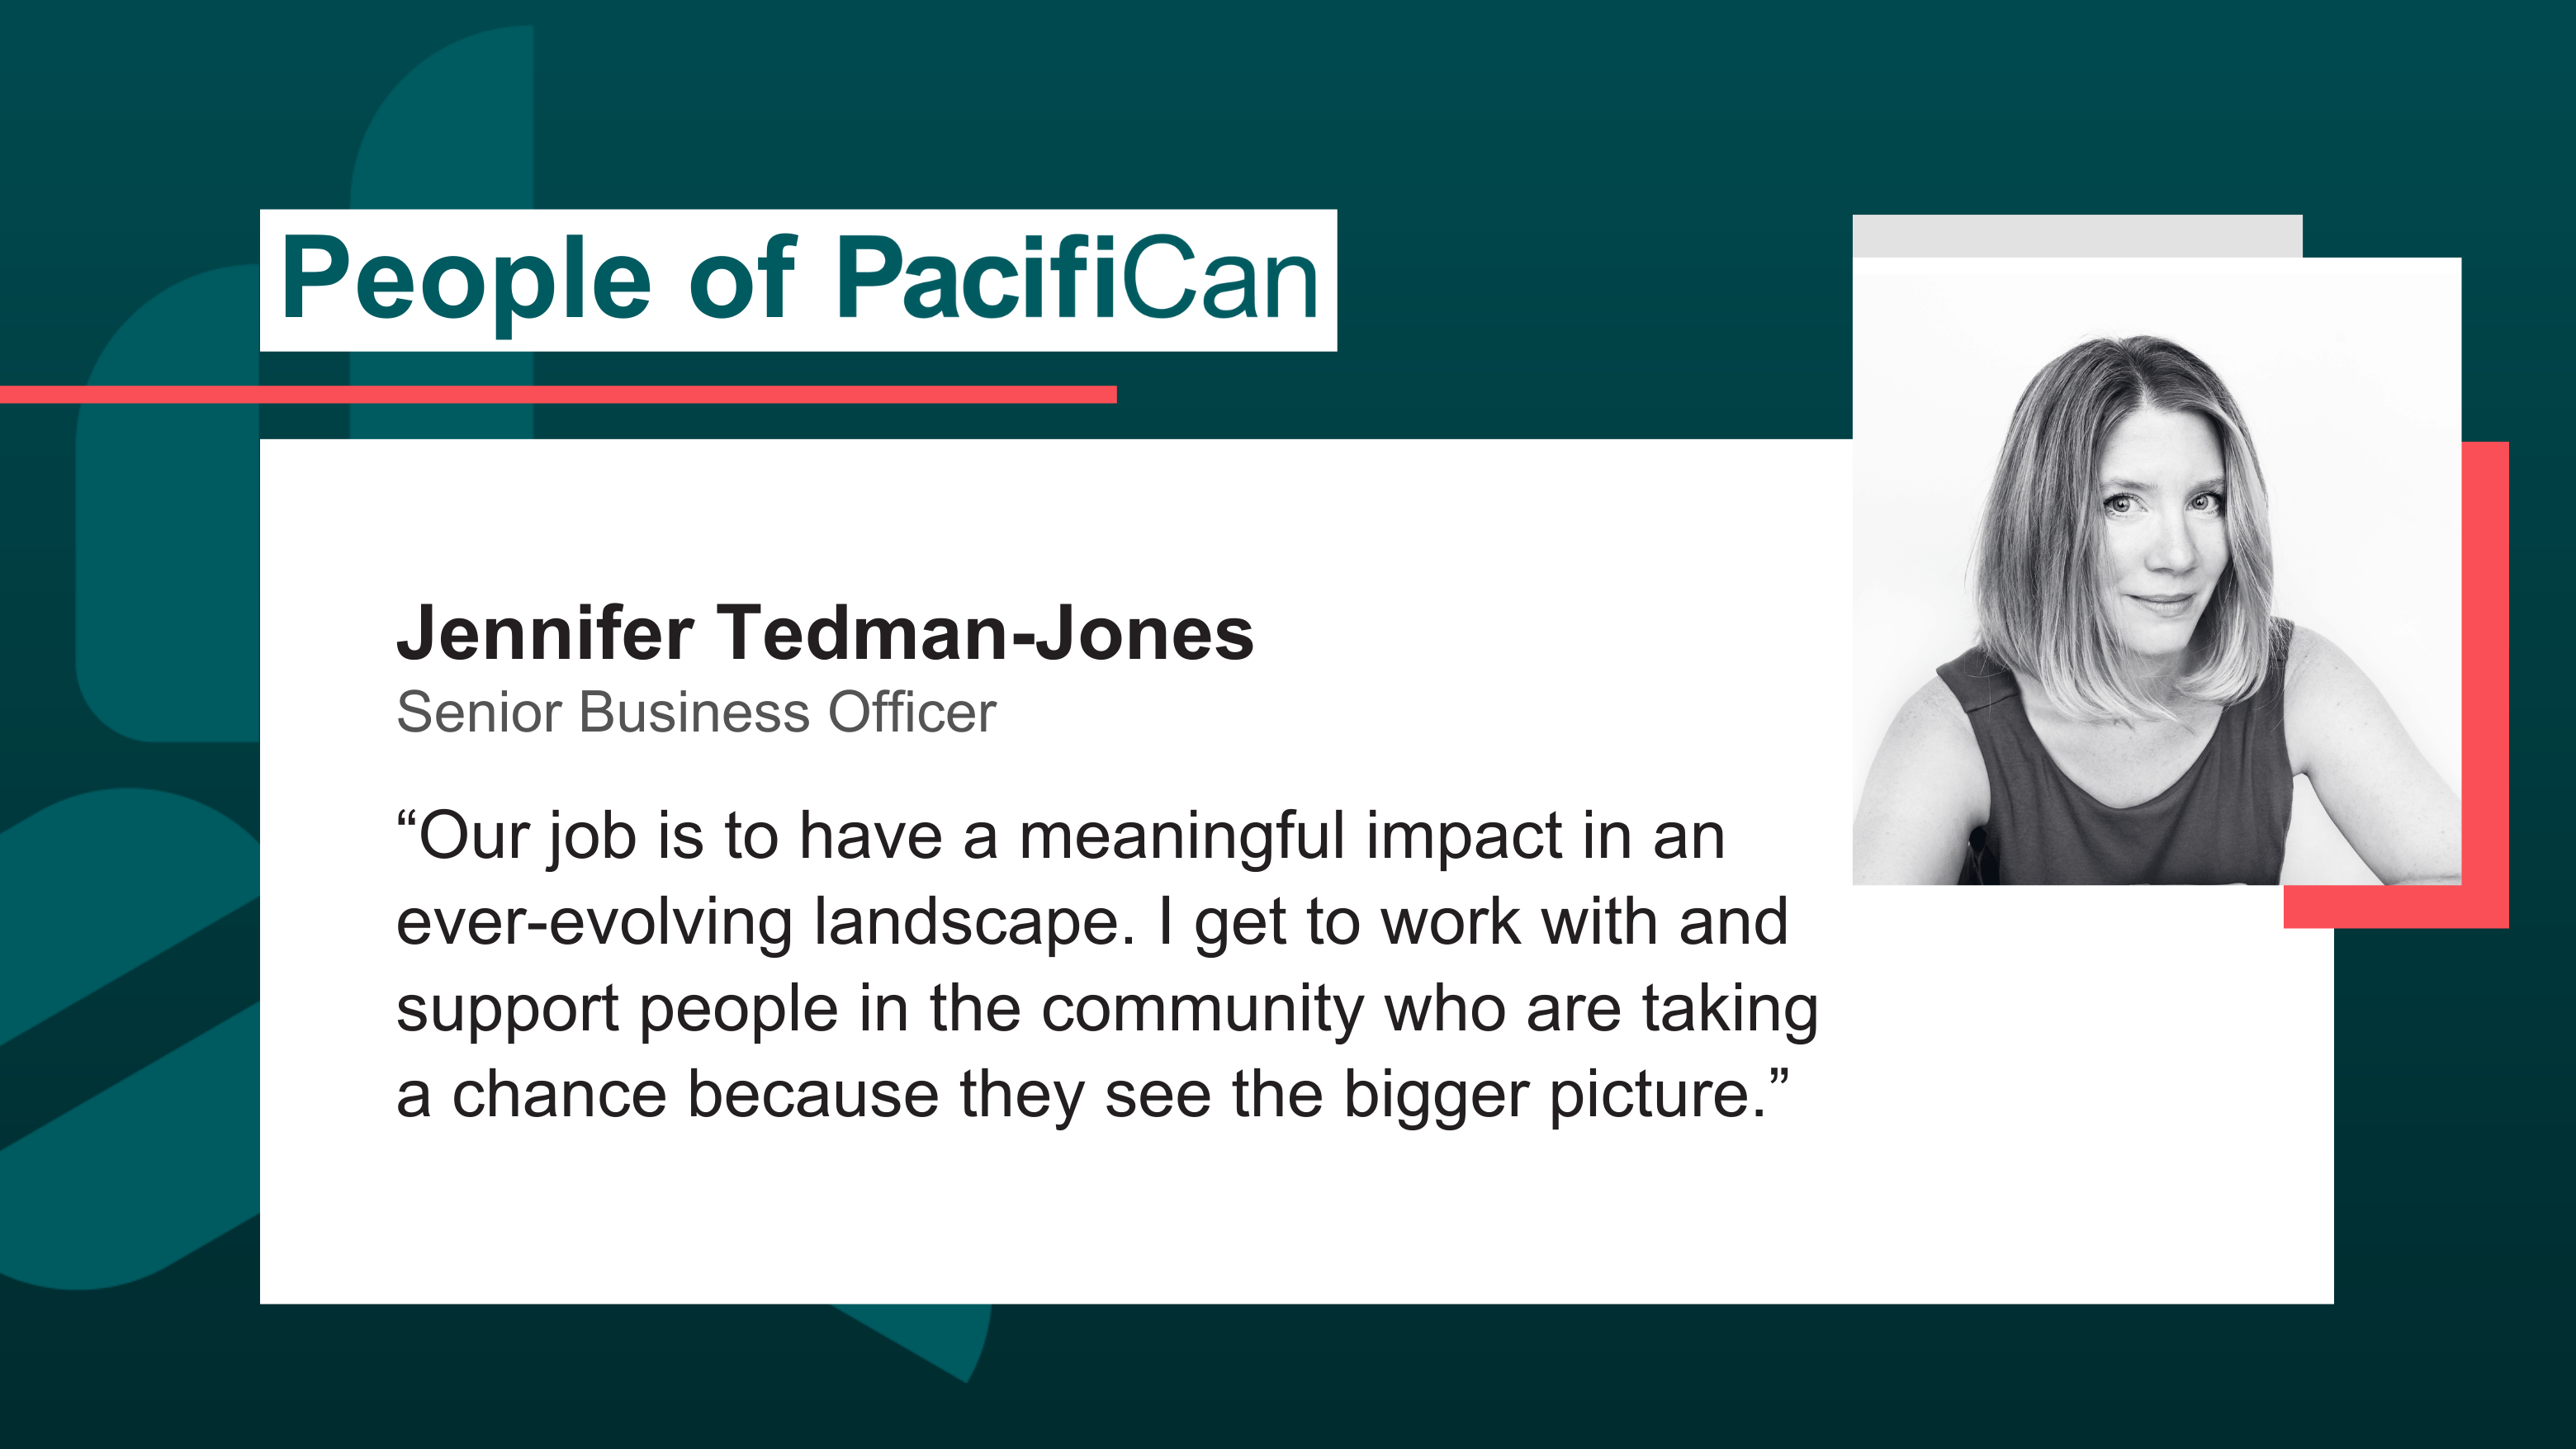 Headshot image of Jennifer Tedman-Jones, Senior Business officer. Her quote reads Our job is to have a meaningful impact in an ever-evolving landscape and I get to work with and support people in the community who are taking a chance because they see the bigger picture.